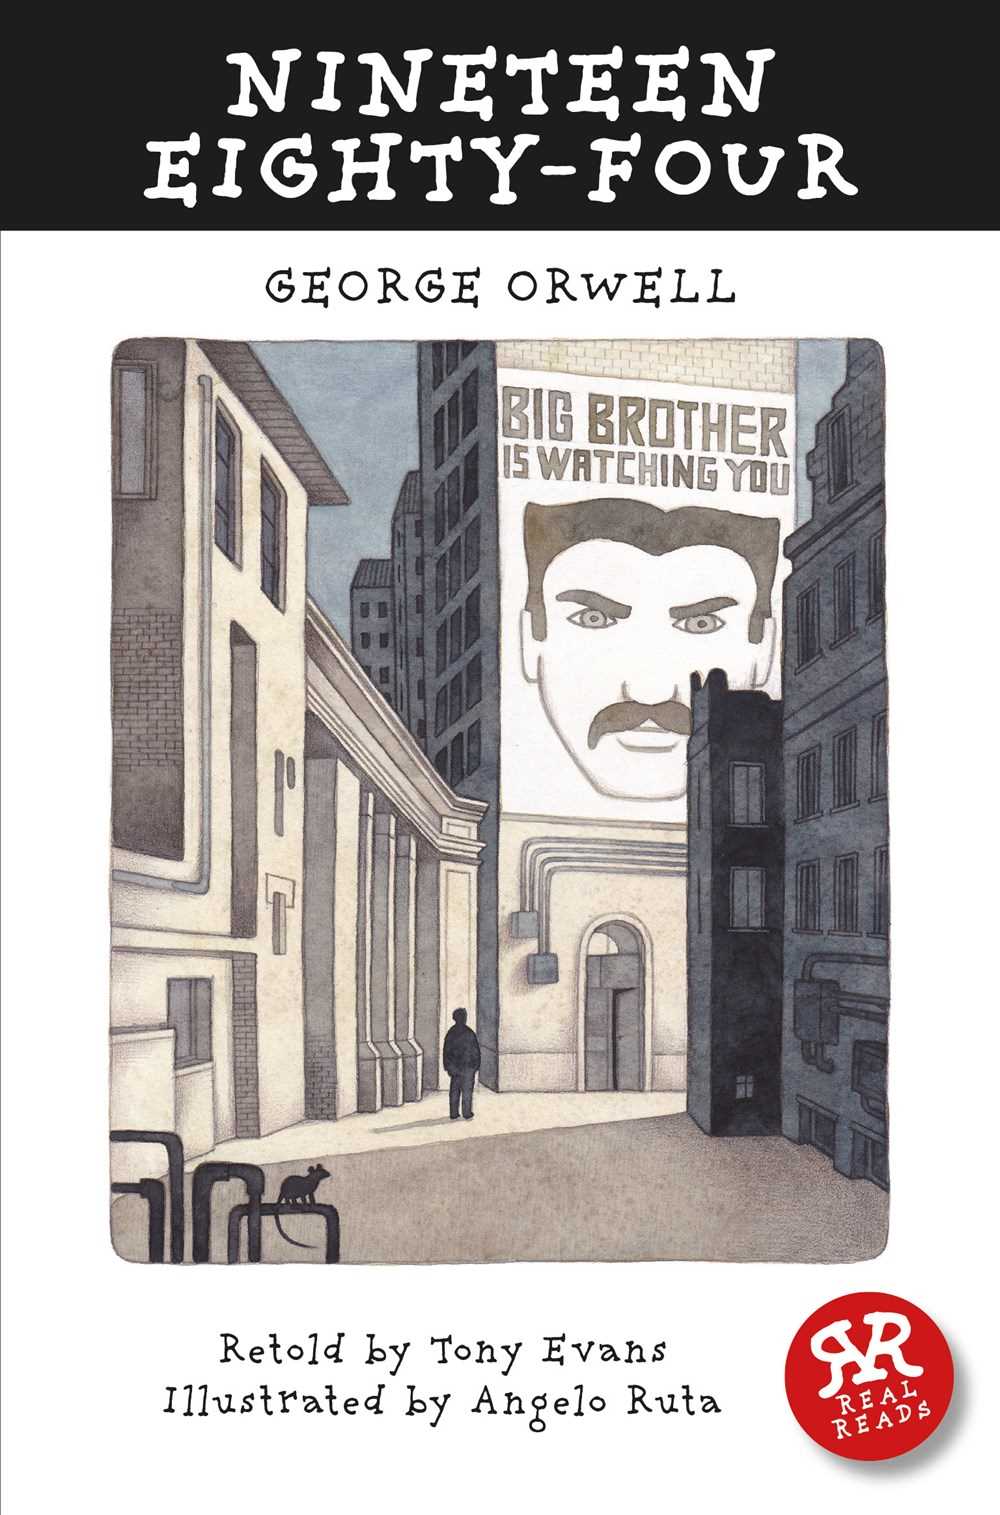 Real Reads: Nineteen Eighty-Four